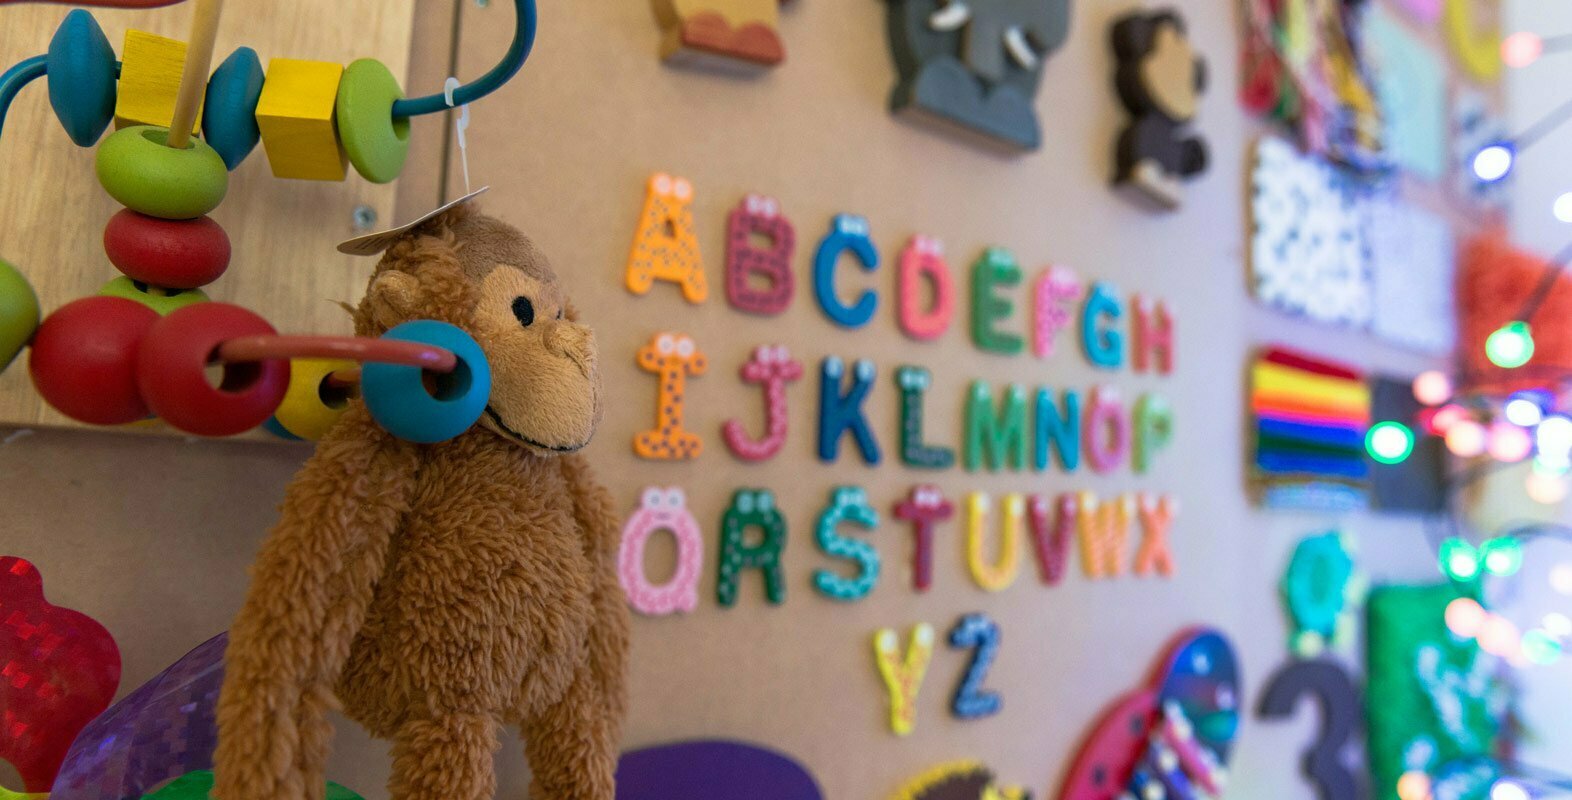 background image showing a fun board with letters and toys